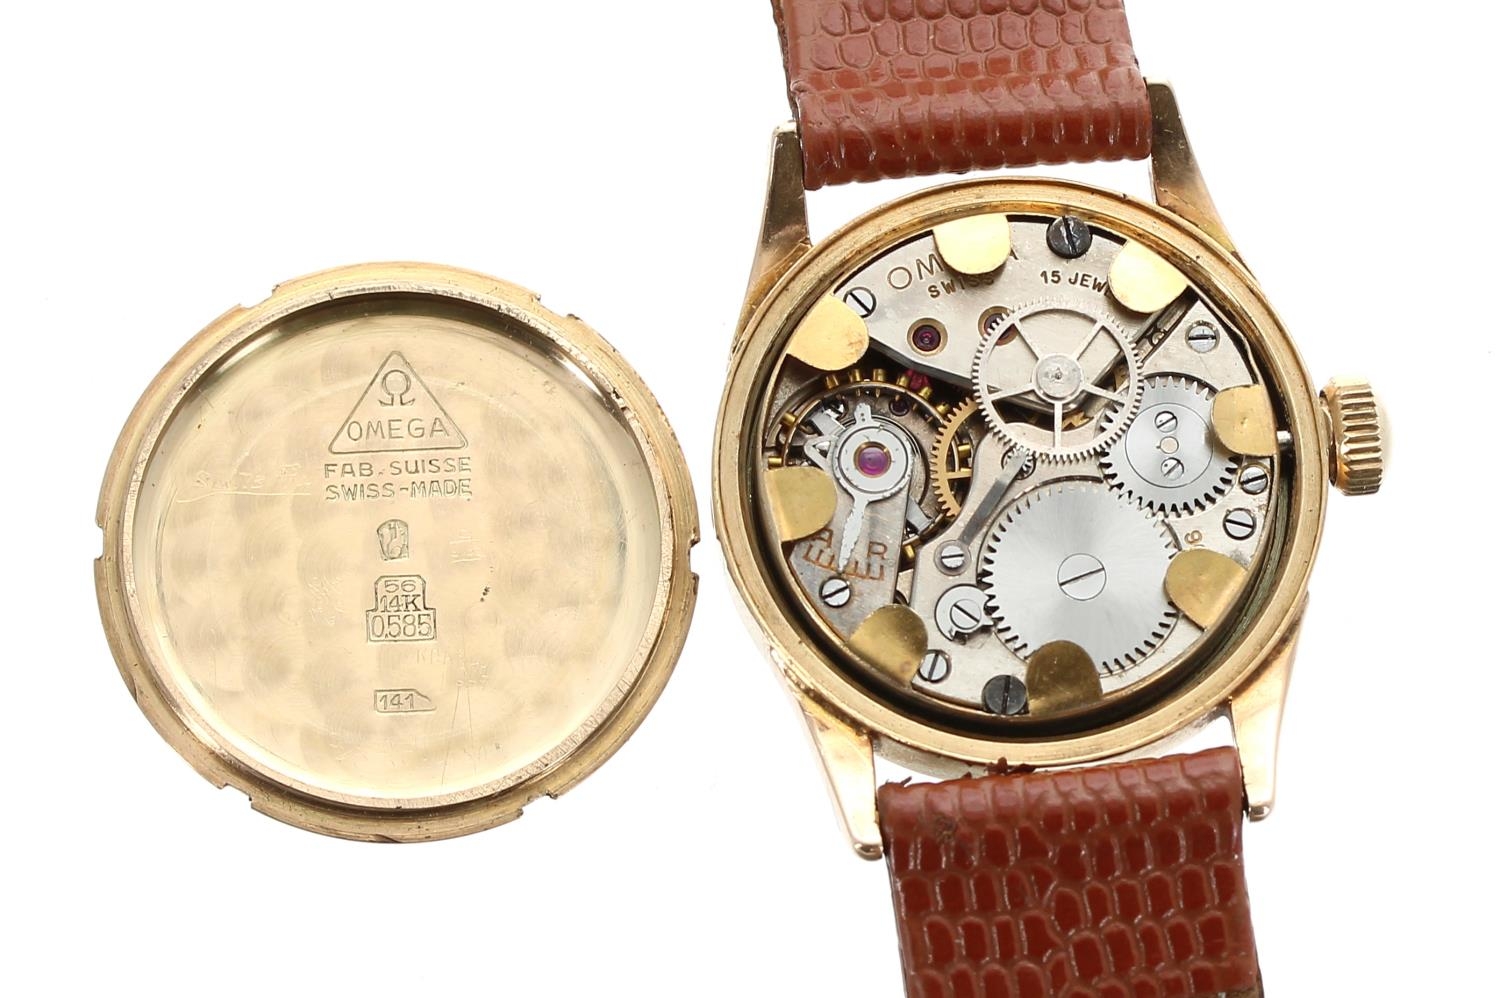 Omega 14k mid-size wristwatch, circular bronze dial with quarter Arabic numerals, hour markers, - Image 3 of 3